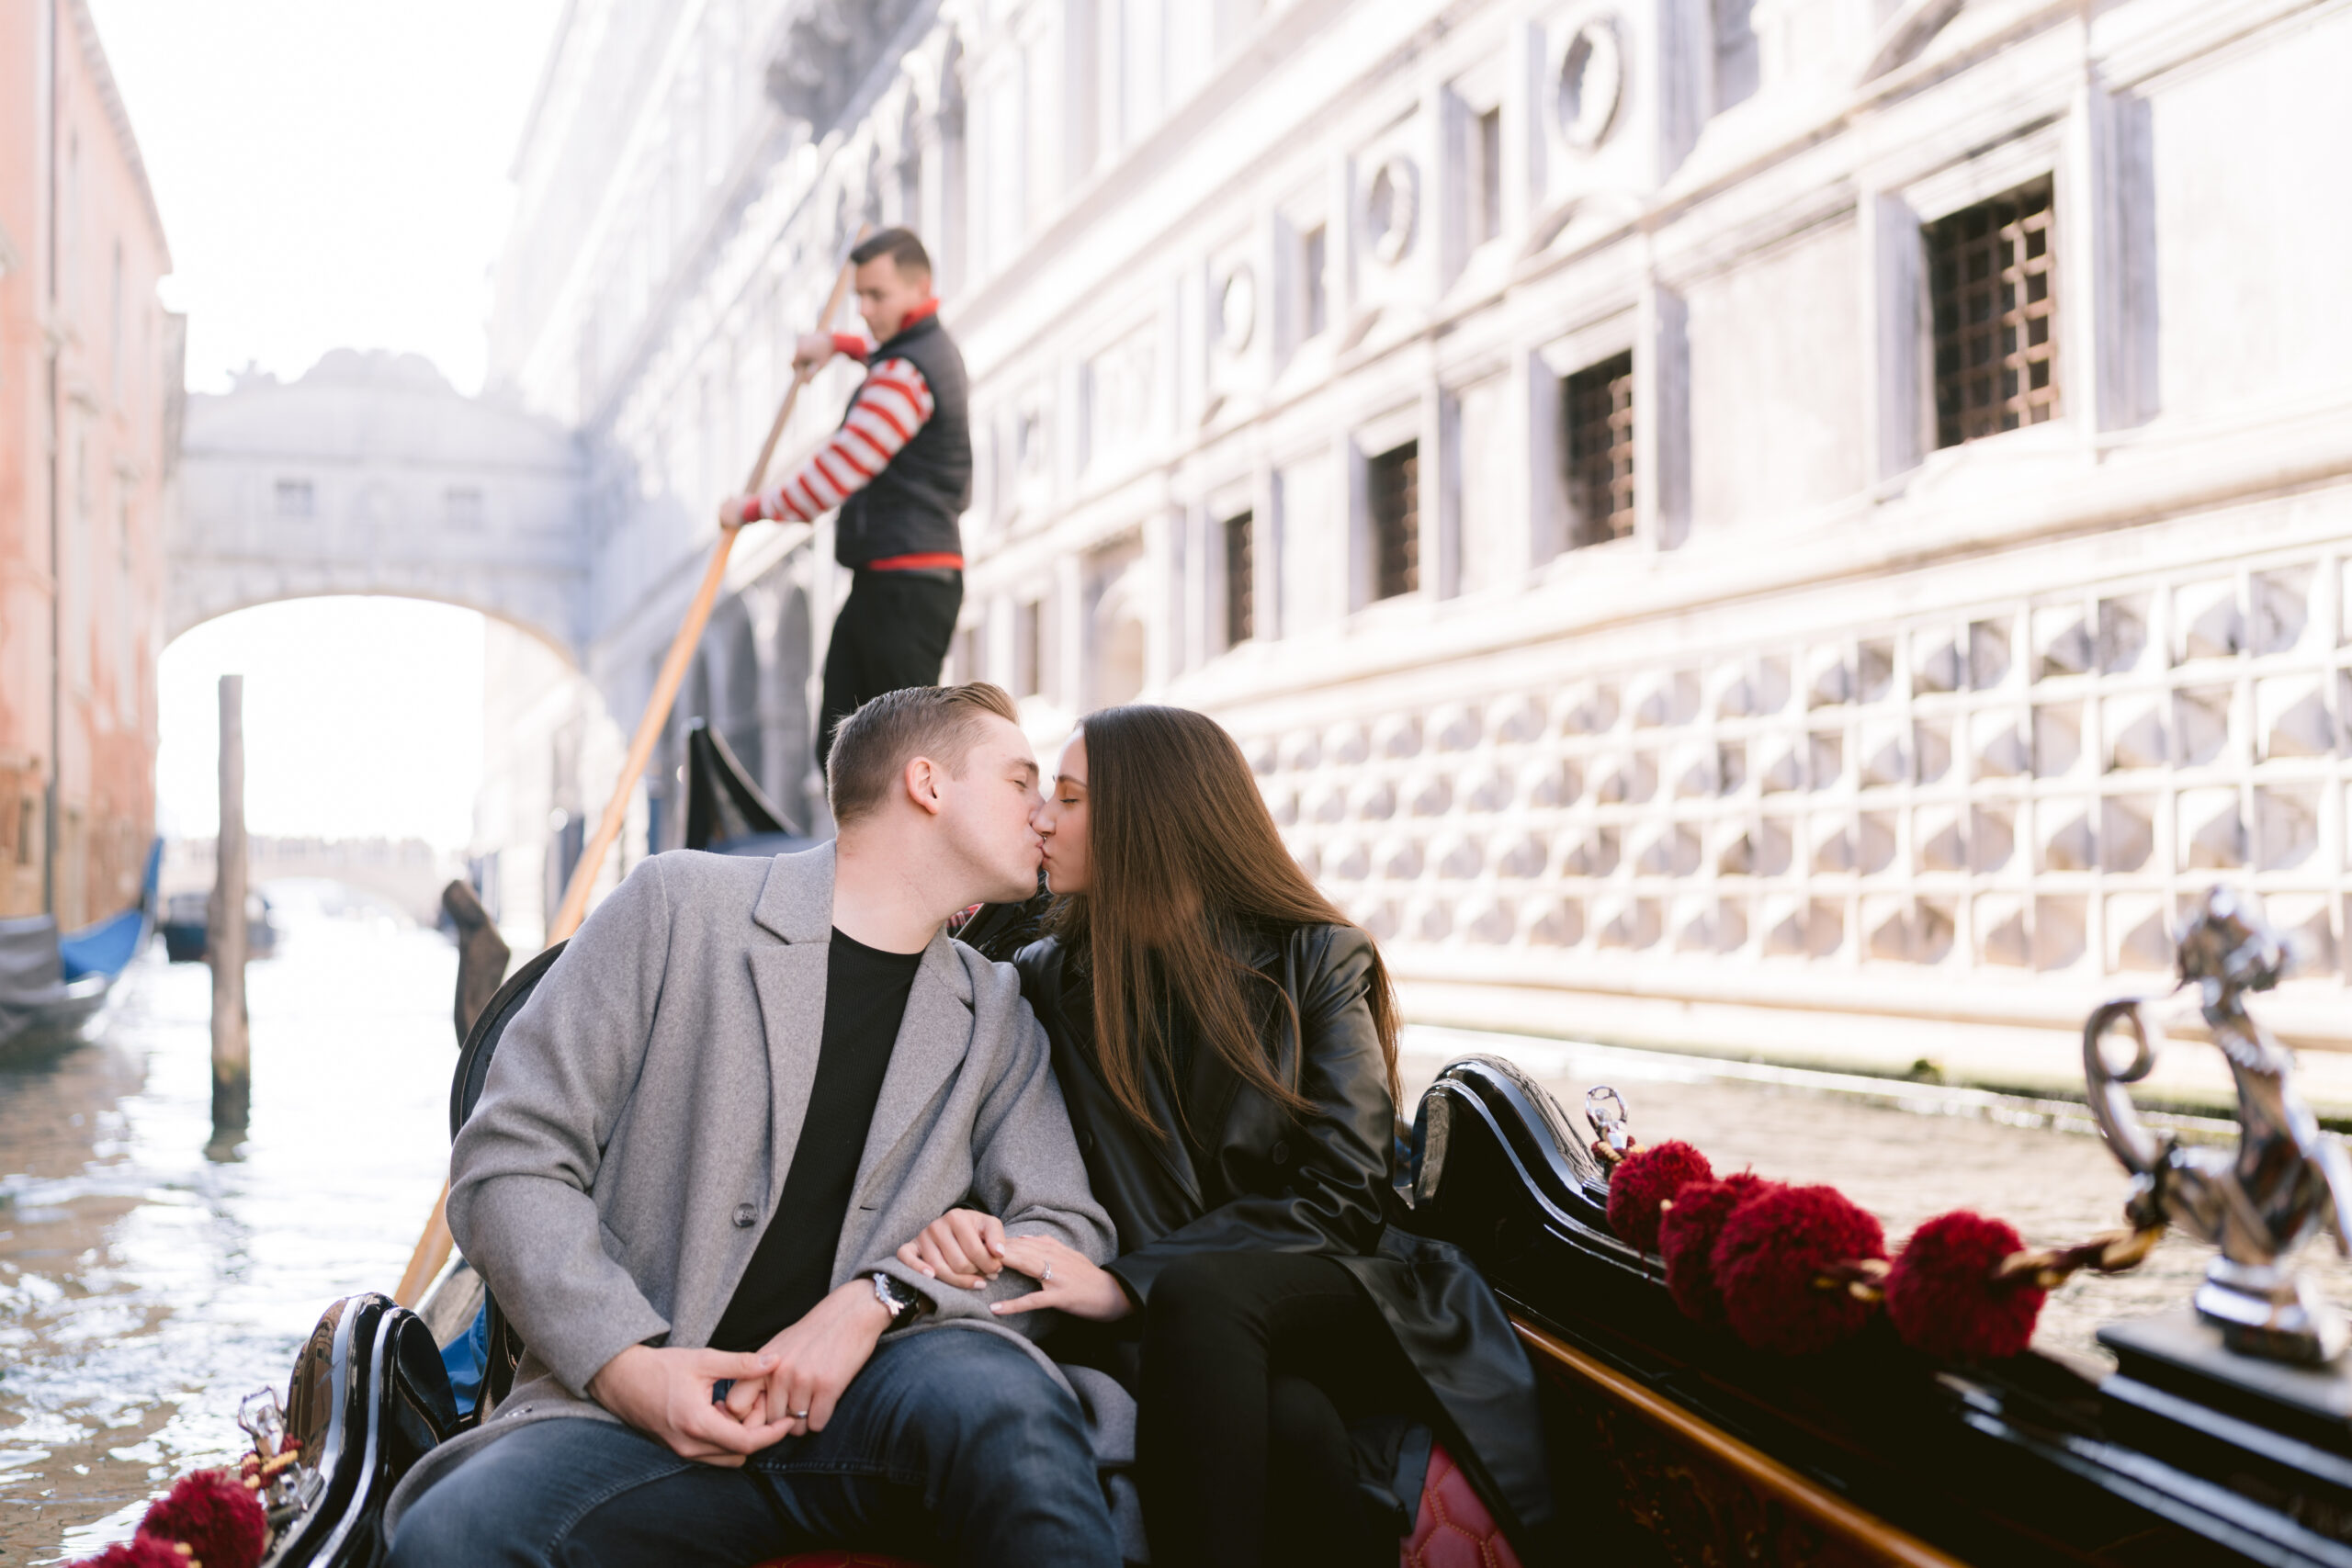 Venice photoshoot for a romantic couple by a professional photographer in Italy